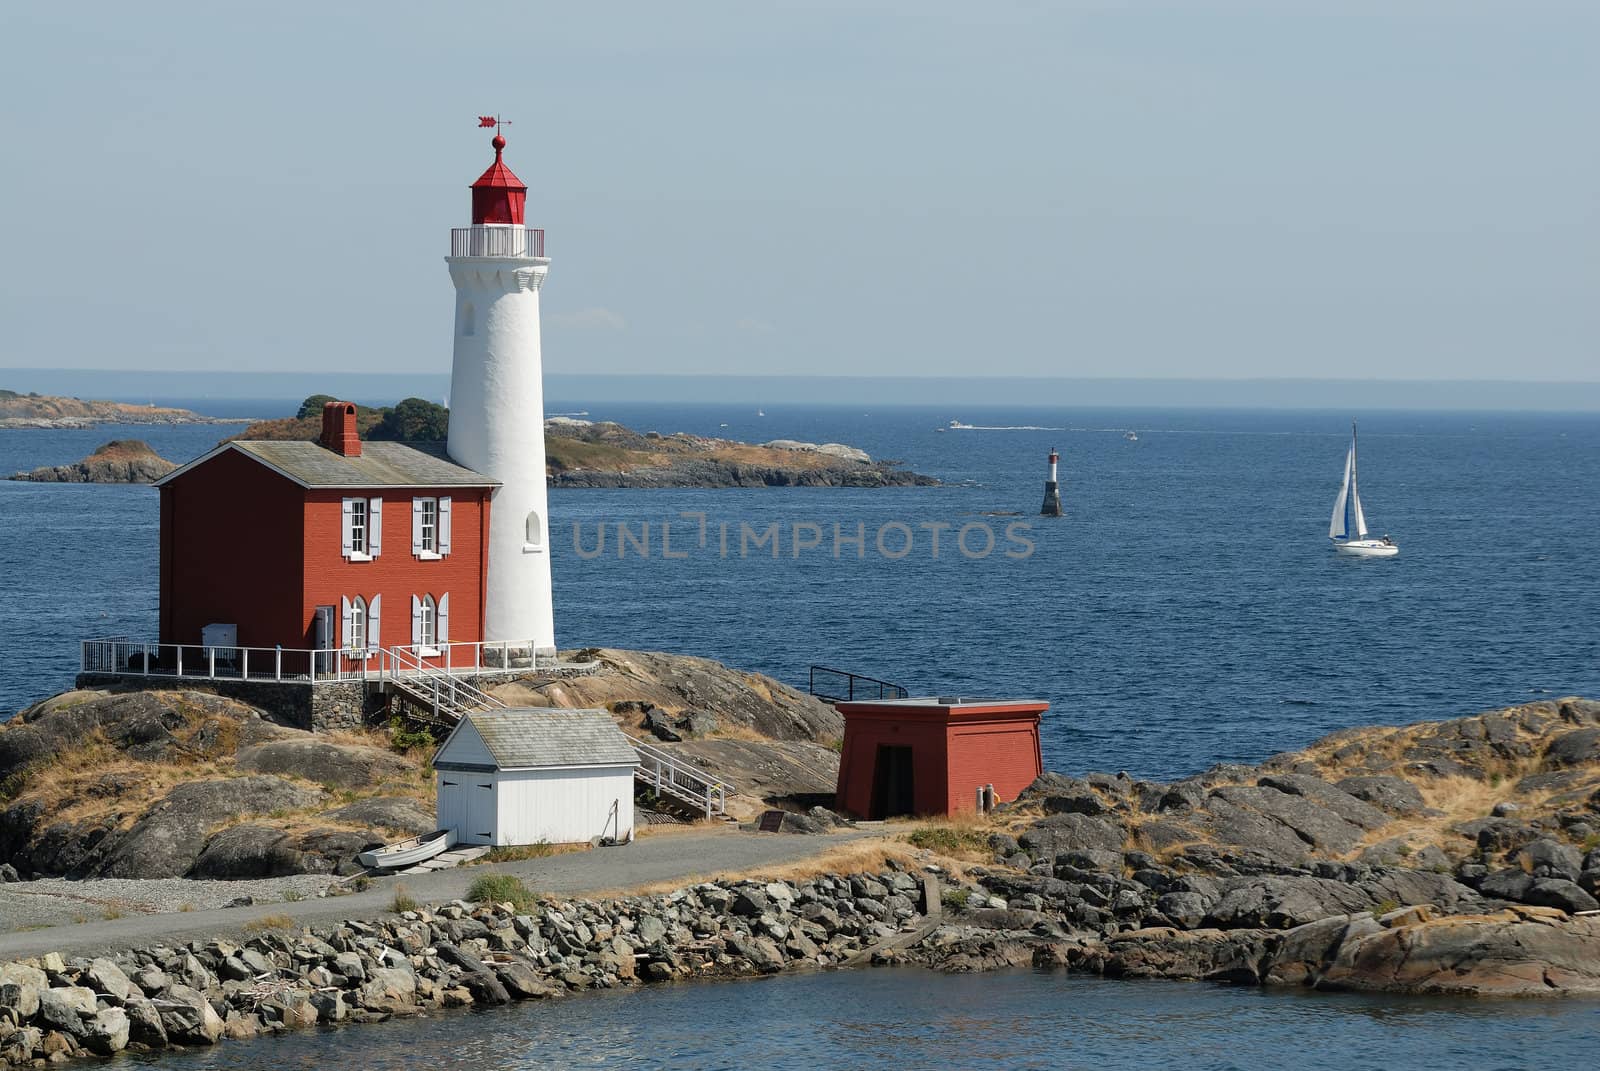 Lighthouse on the rocks on the background of the ocean